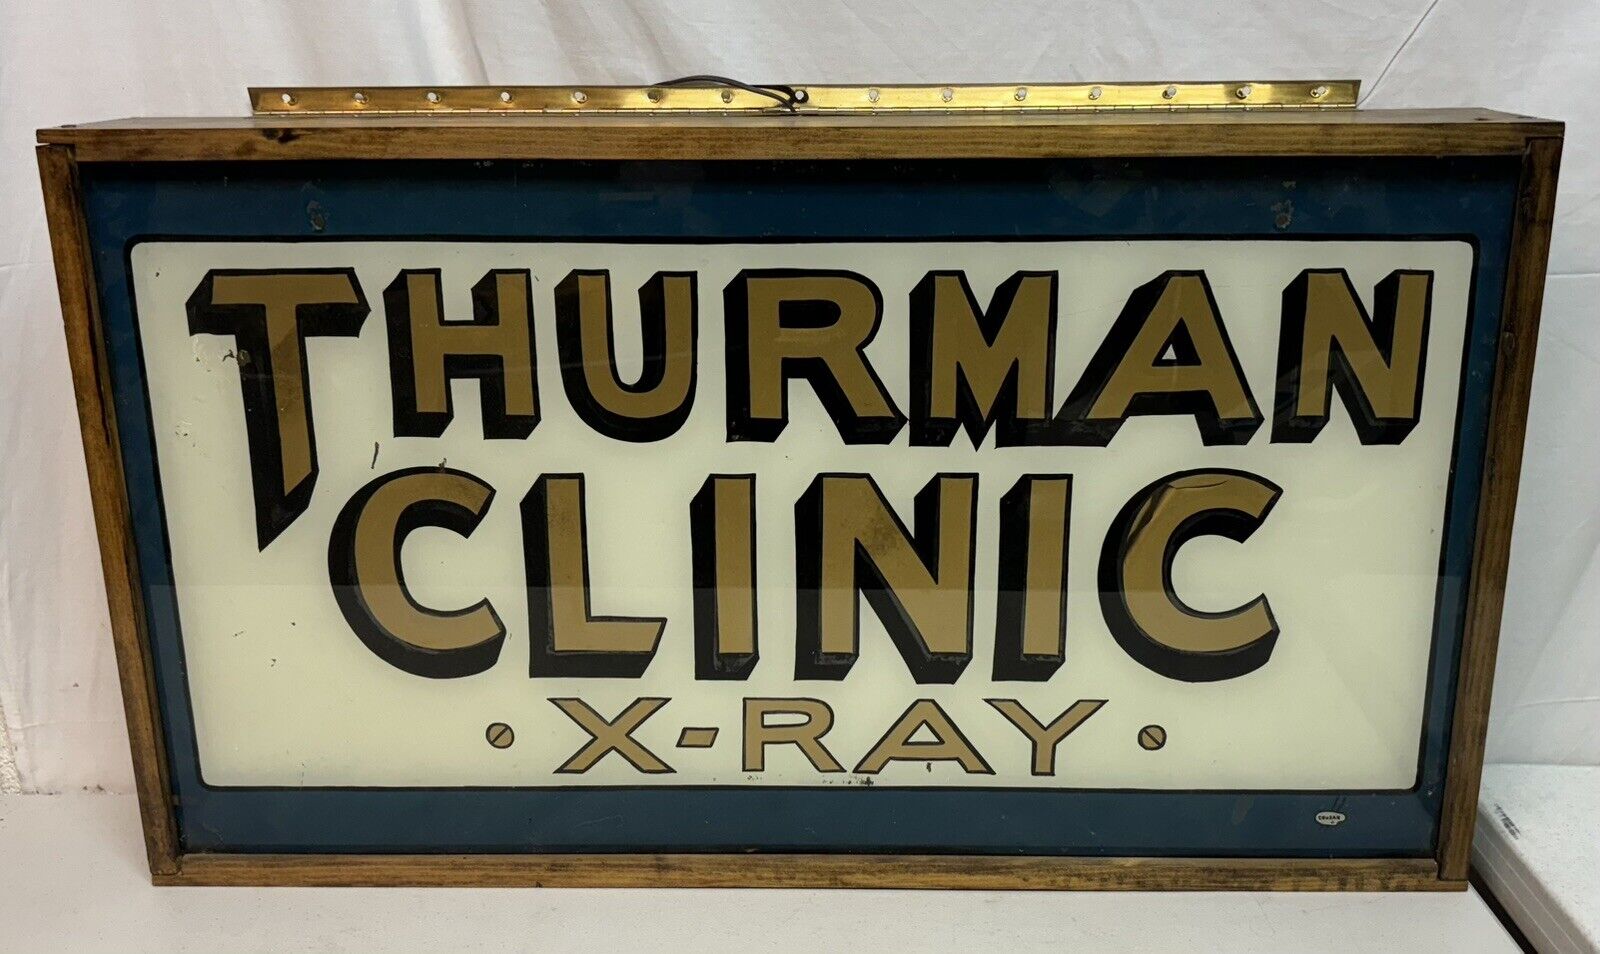 Vintage Restored Distressed Hand Painted X-Ray Advertisement Sign Rare Tested